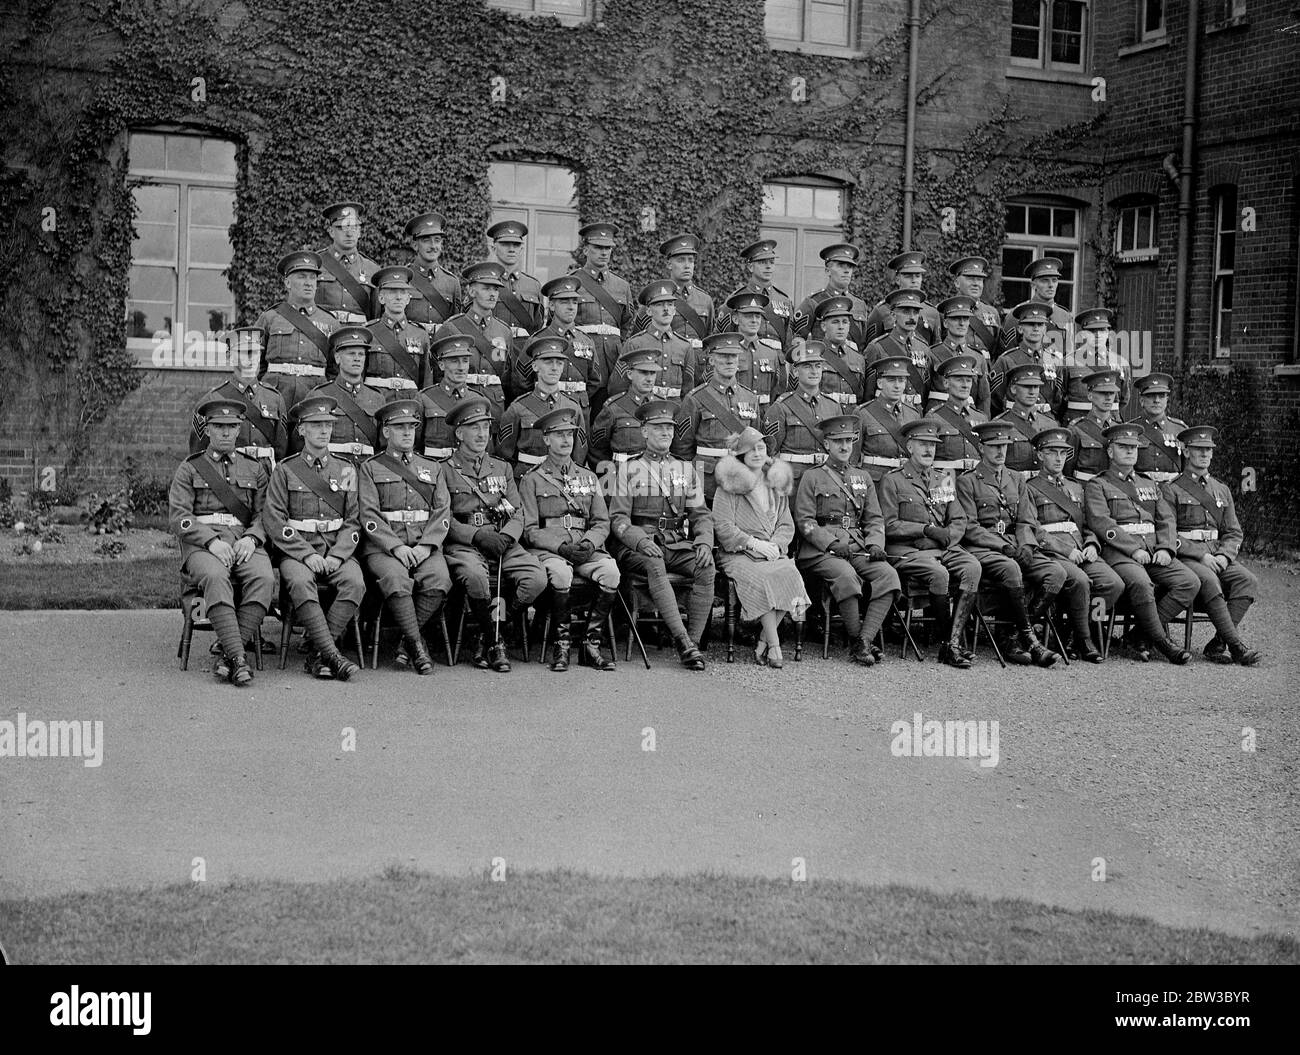 A group photograph of the Duchess of York with her regiment . She is Commander - in - Chief of the King ' s Own Yorkshire Light Infantry , based at Tidworth . 27 October 1934 Stock Photo